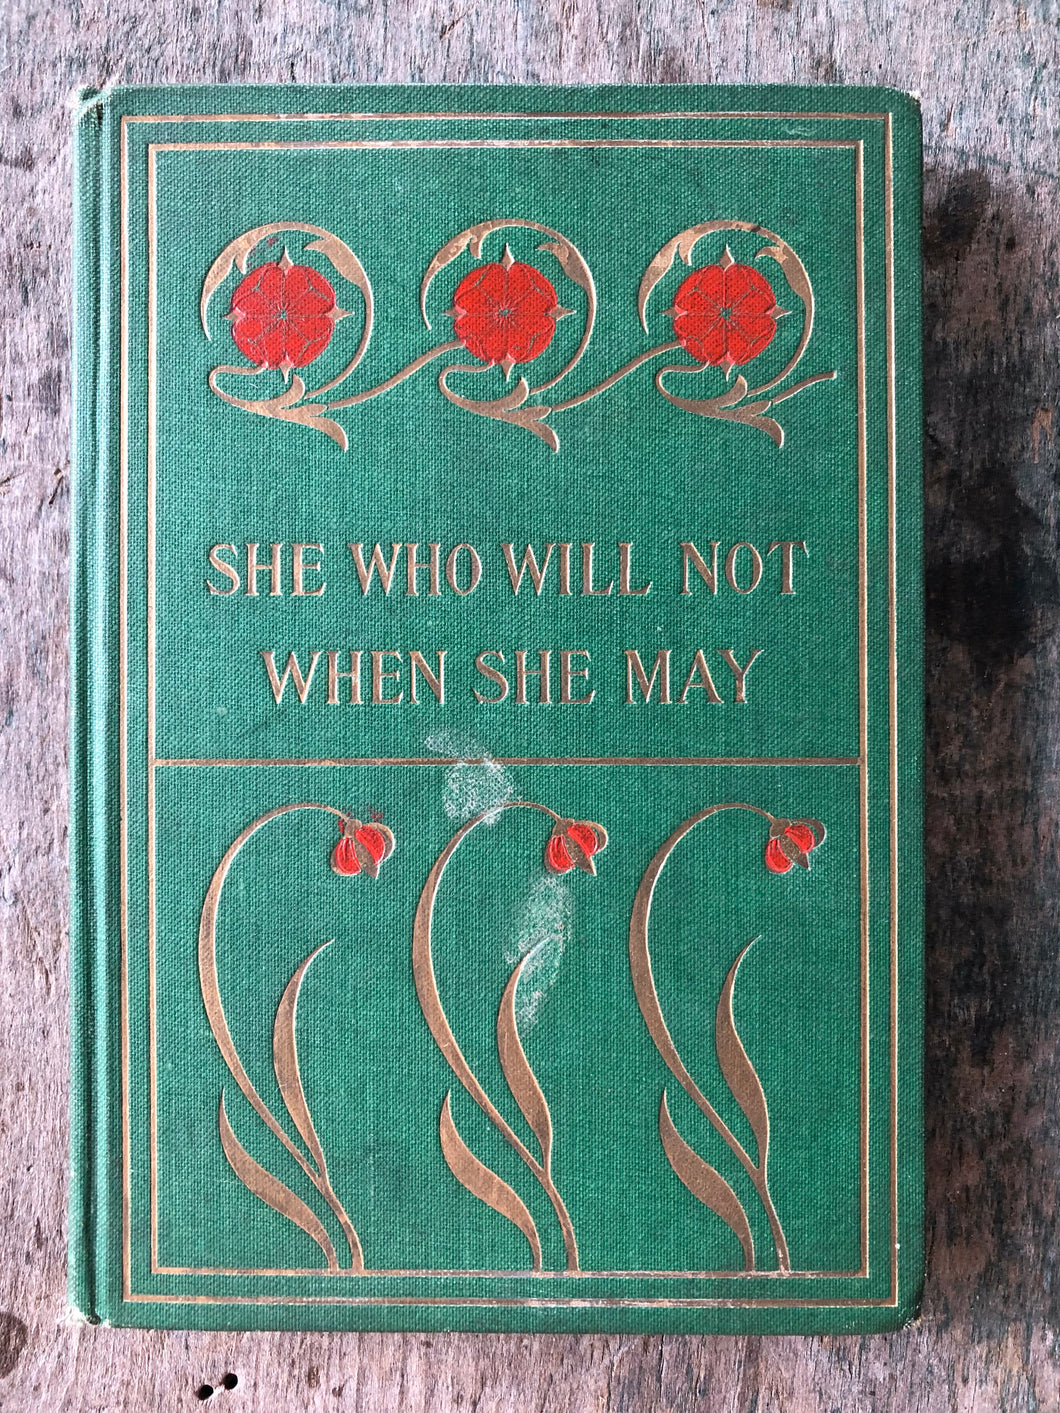 She Who Will Not When She May by Eleanor G. Walton. Illustrated by C. P. M. Rumford